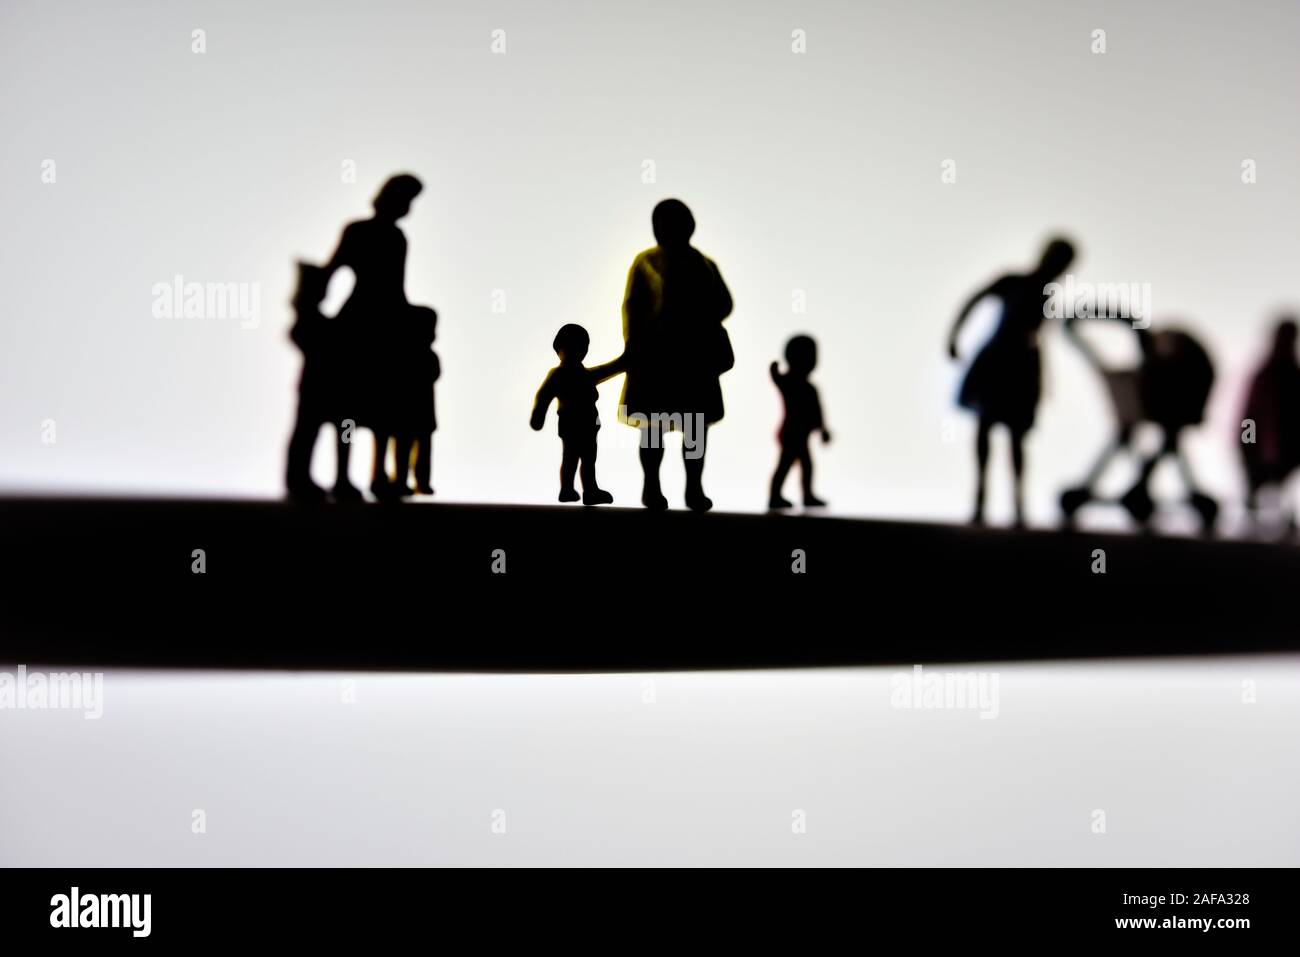 miniature figurines, mothers and children,concept,silhouette Stock Photo